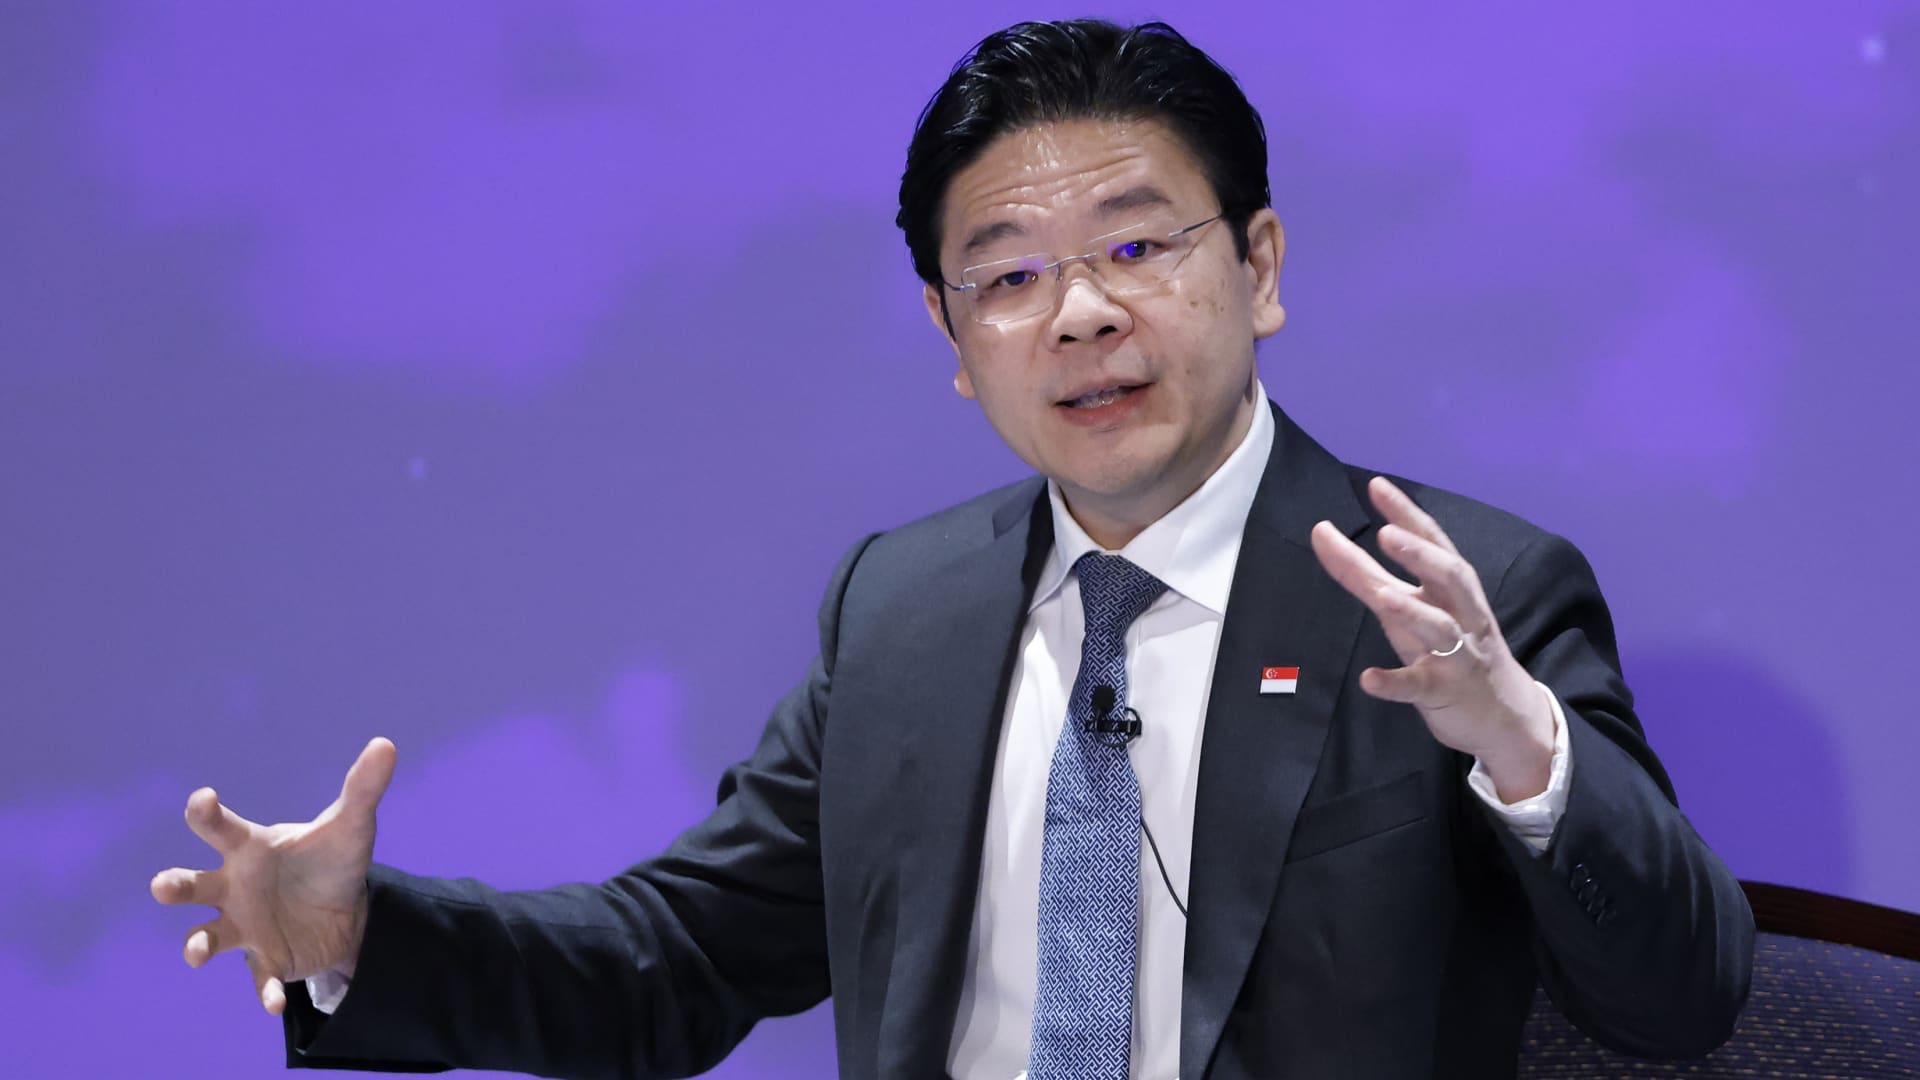 Brace for disruption — but A.I. won’t eliminate jobs completely, says Singapore’s deputy prime minister